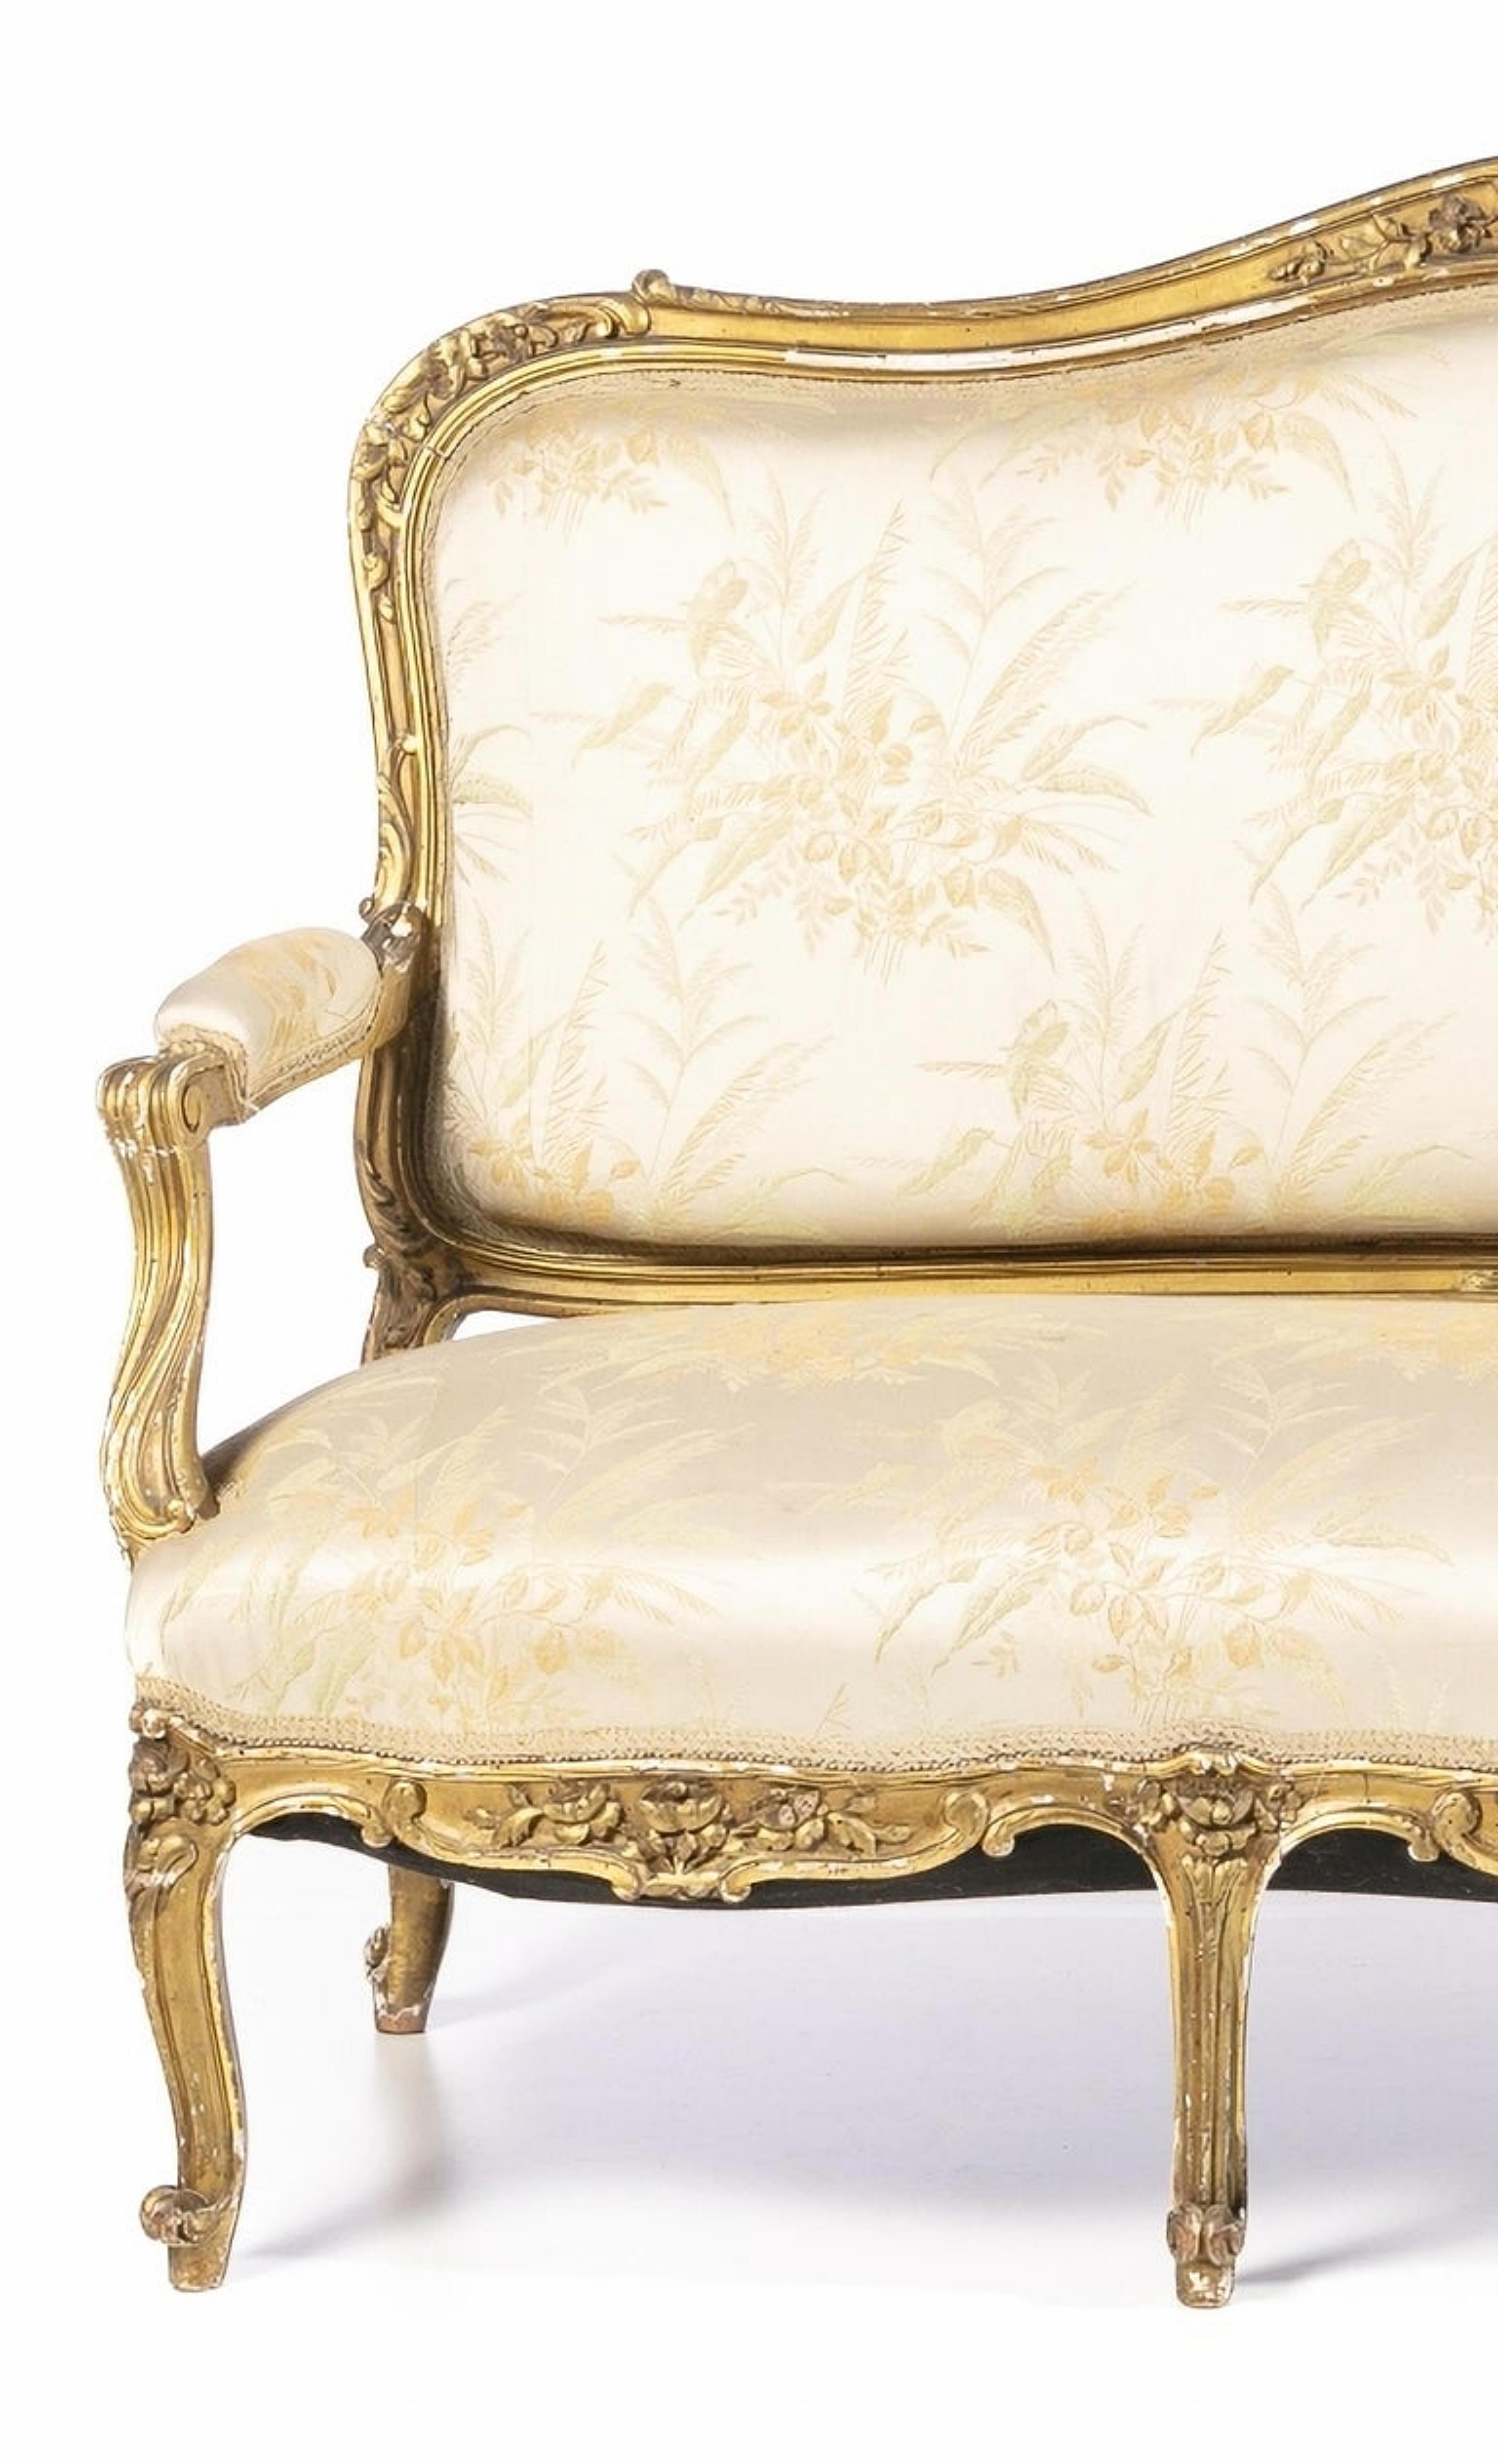 Beautiful French Canape 18th Century

French from the 18th century,
in carved and gilded wood. 
Upholstered seat, back and arms. 
Dim.: 112 x 169 x 60 cm.
good condition